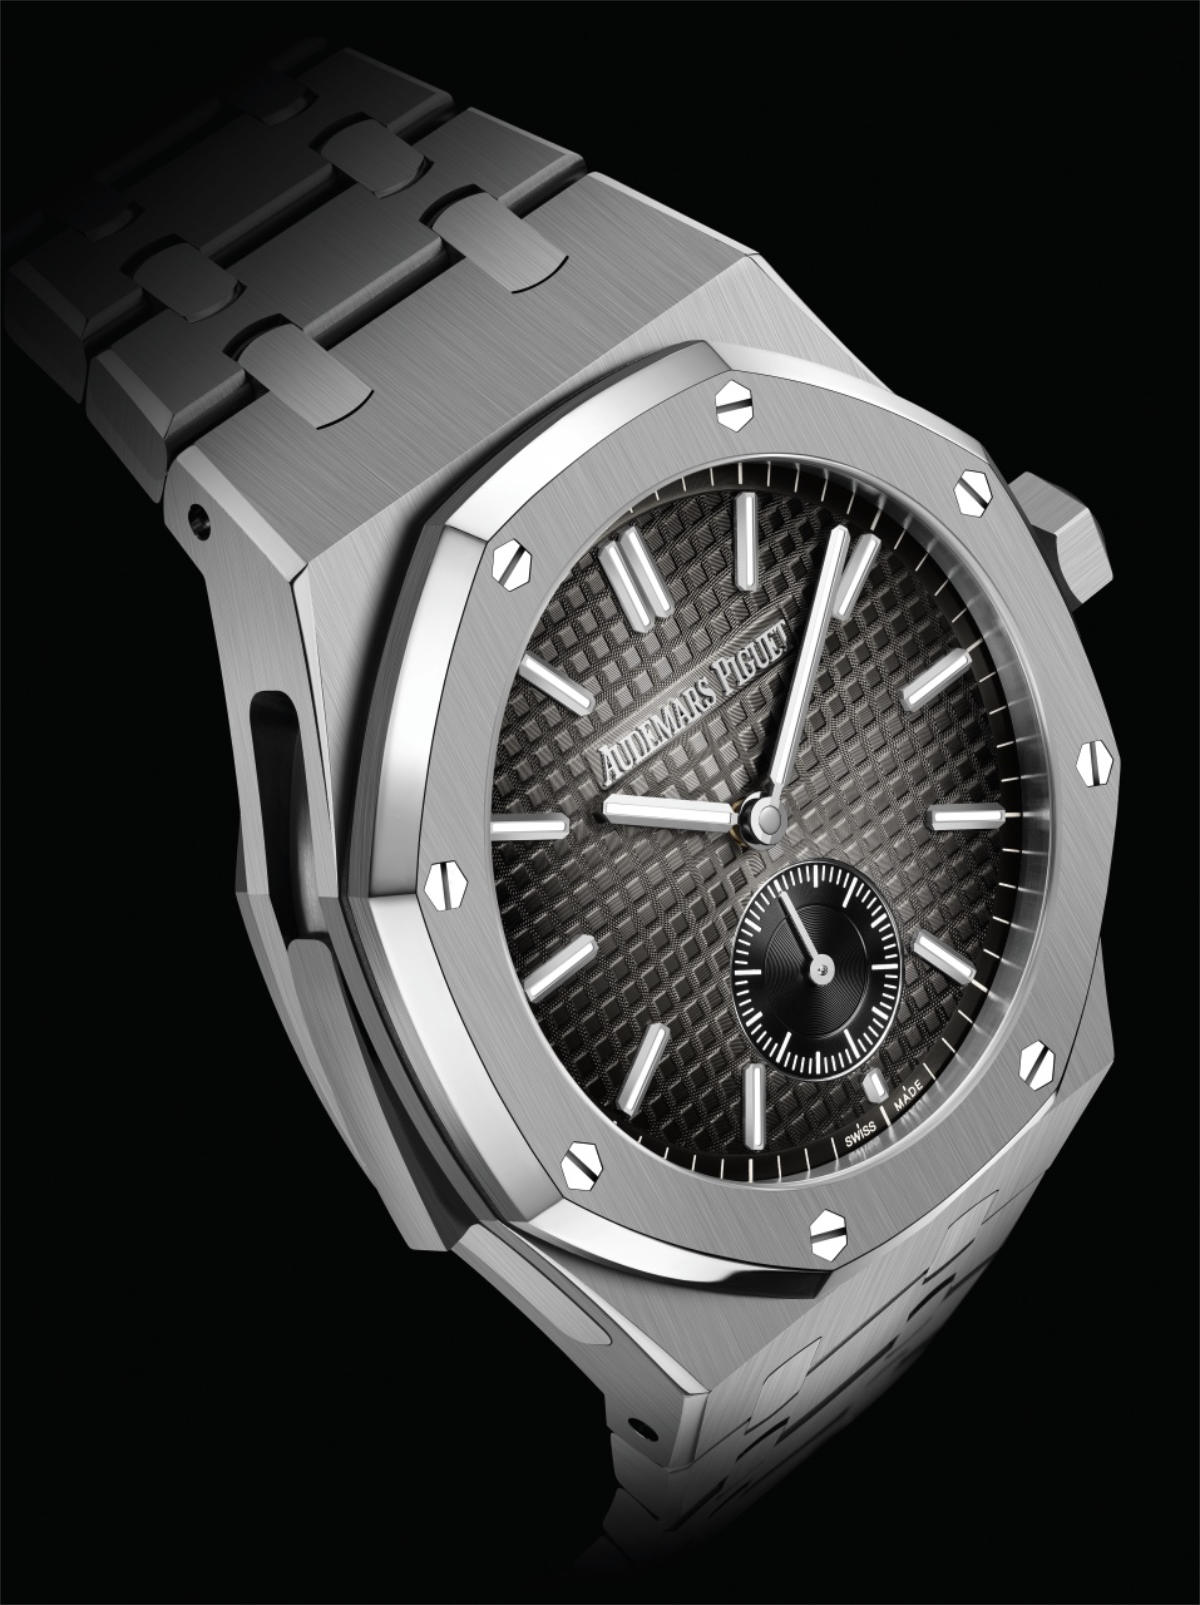 Audemars Piguet Reveals A New Royal Oak Minute Repeater Supersonnerie Entirely Crafted In Titanium